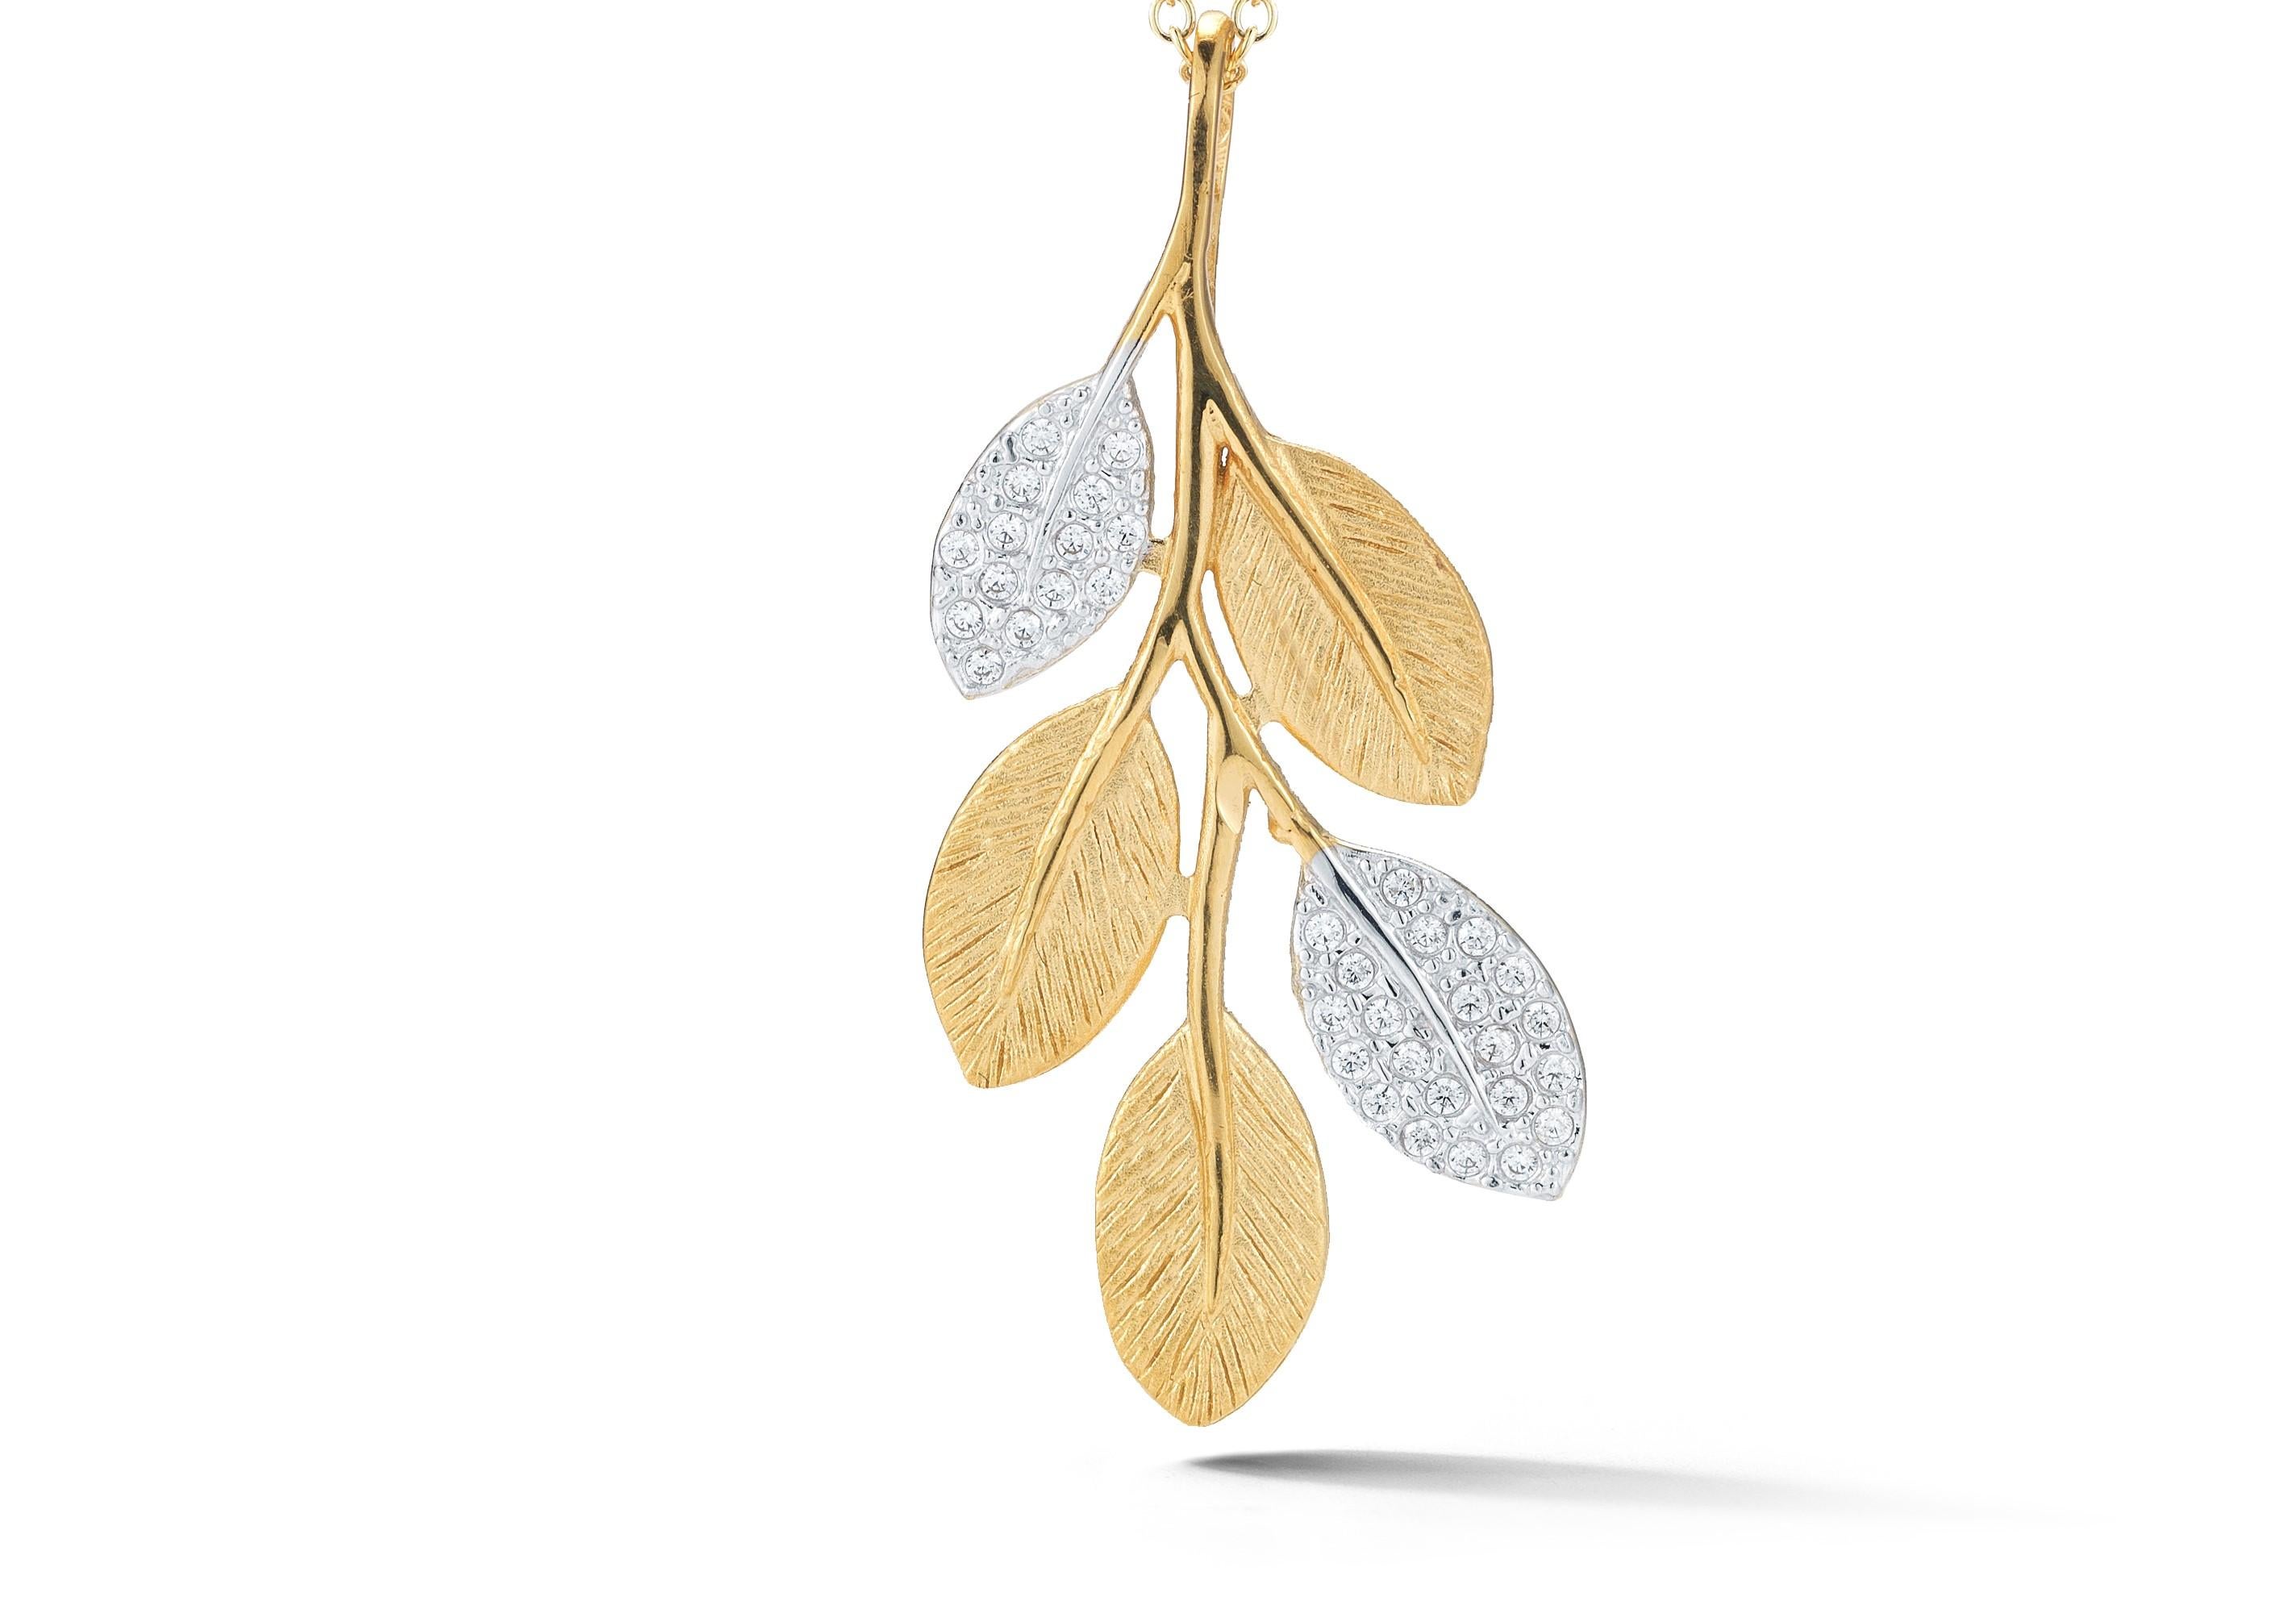 14 Karat Yellow Gold Hand-Crafted Mixed Matte, Polish, and Textured-Finish Branching Leaves Pendant, Accented with 0.21 Carats of Pave Set Leaves, Sliding on a 16